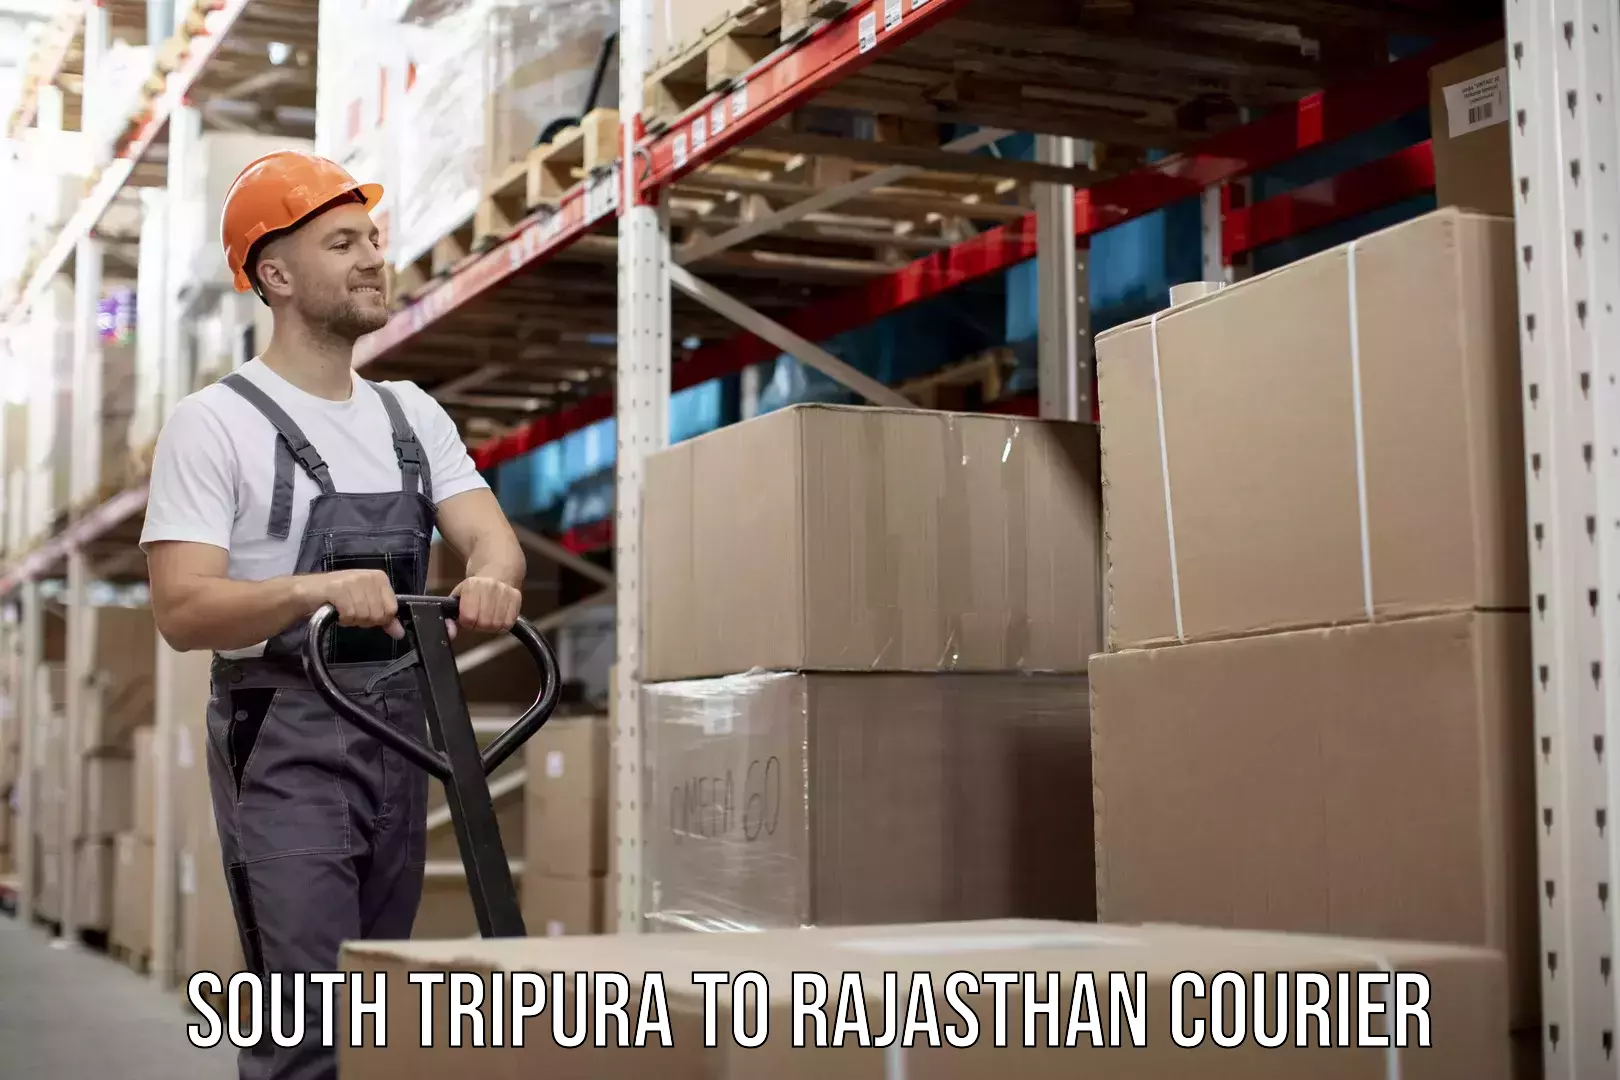 Express logistics service in South Tripura to Rajasthan